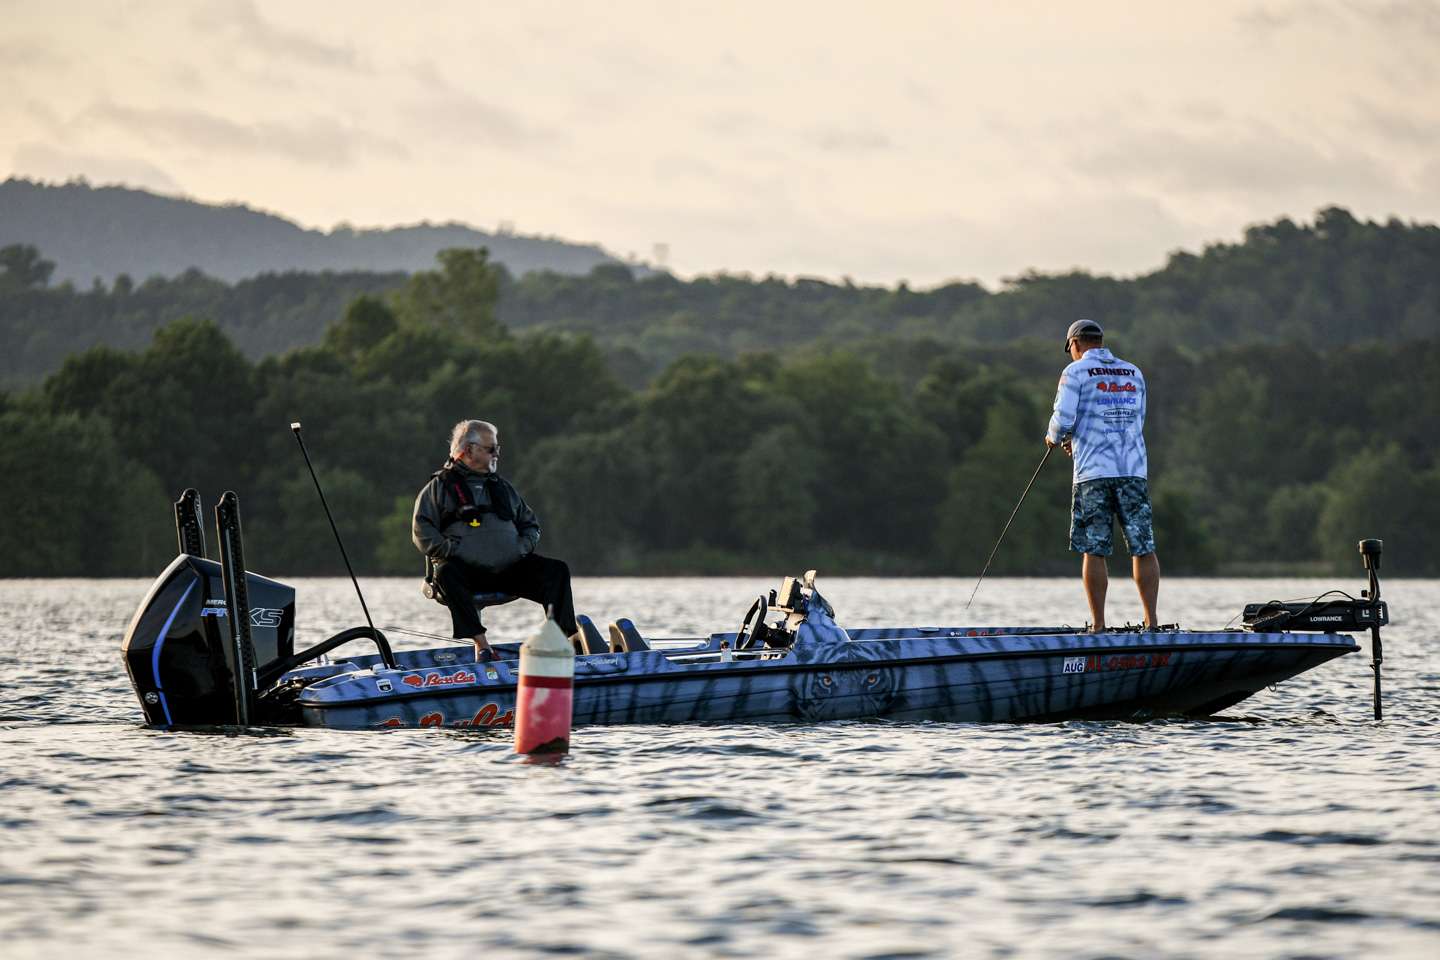 Follow along with Steve Kennedy, Luke Palmer, and Drew Benton as they get started on Day 1 of the 2021 Berkley Bassmaster Elite at Lake Guntersville!
